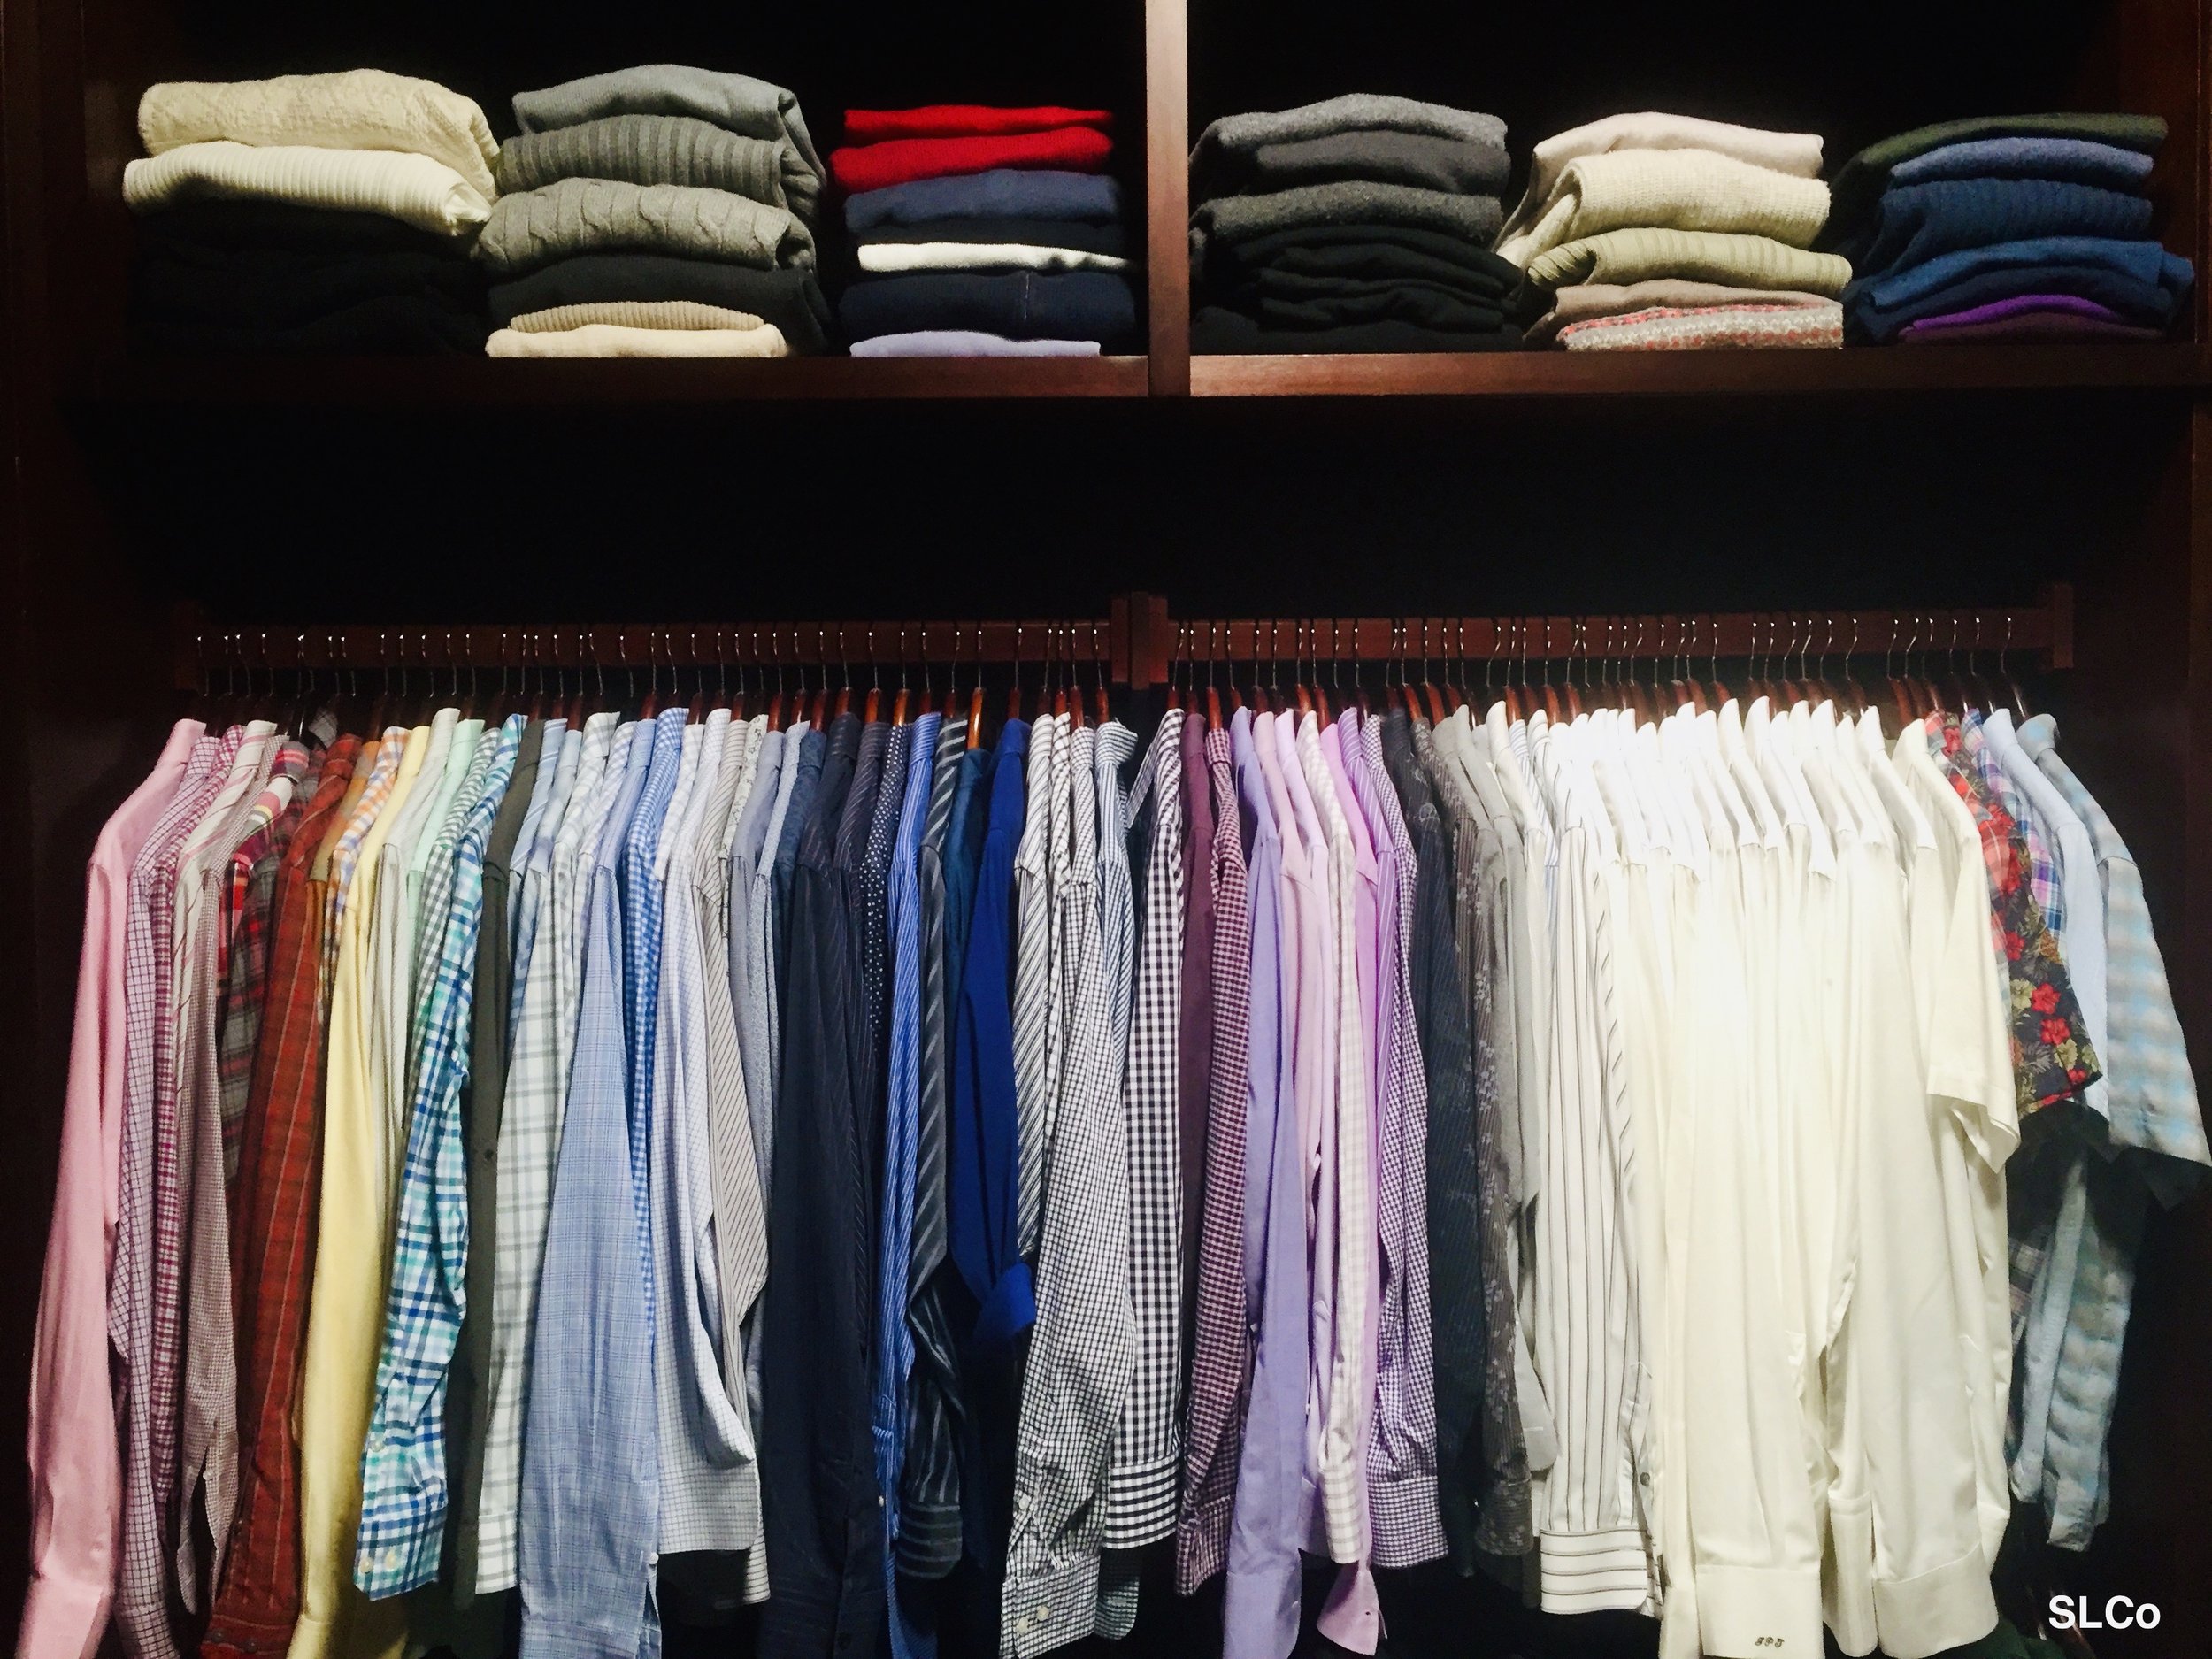 Mens closet with wooden shelves above hanging items, with folded dress shirts